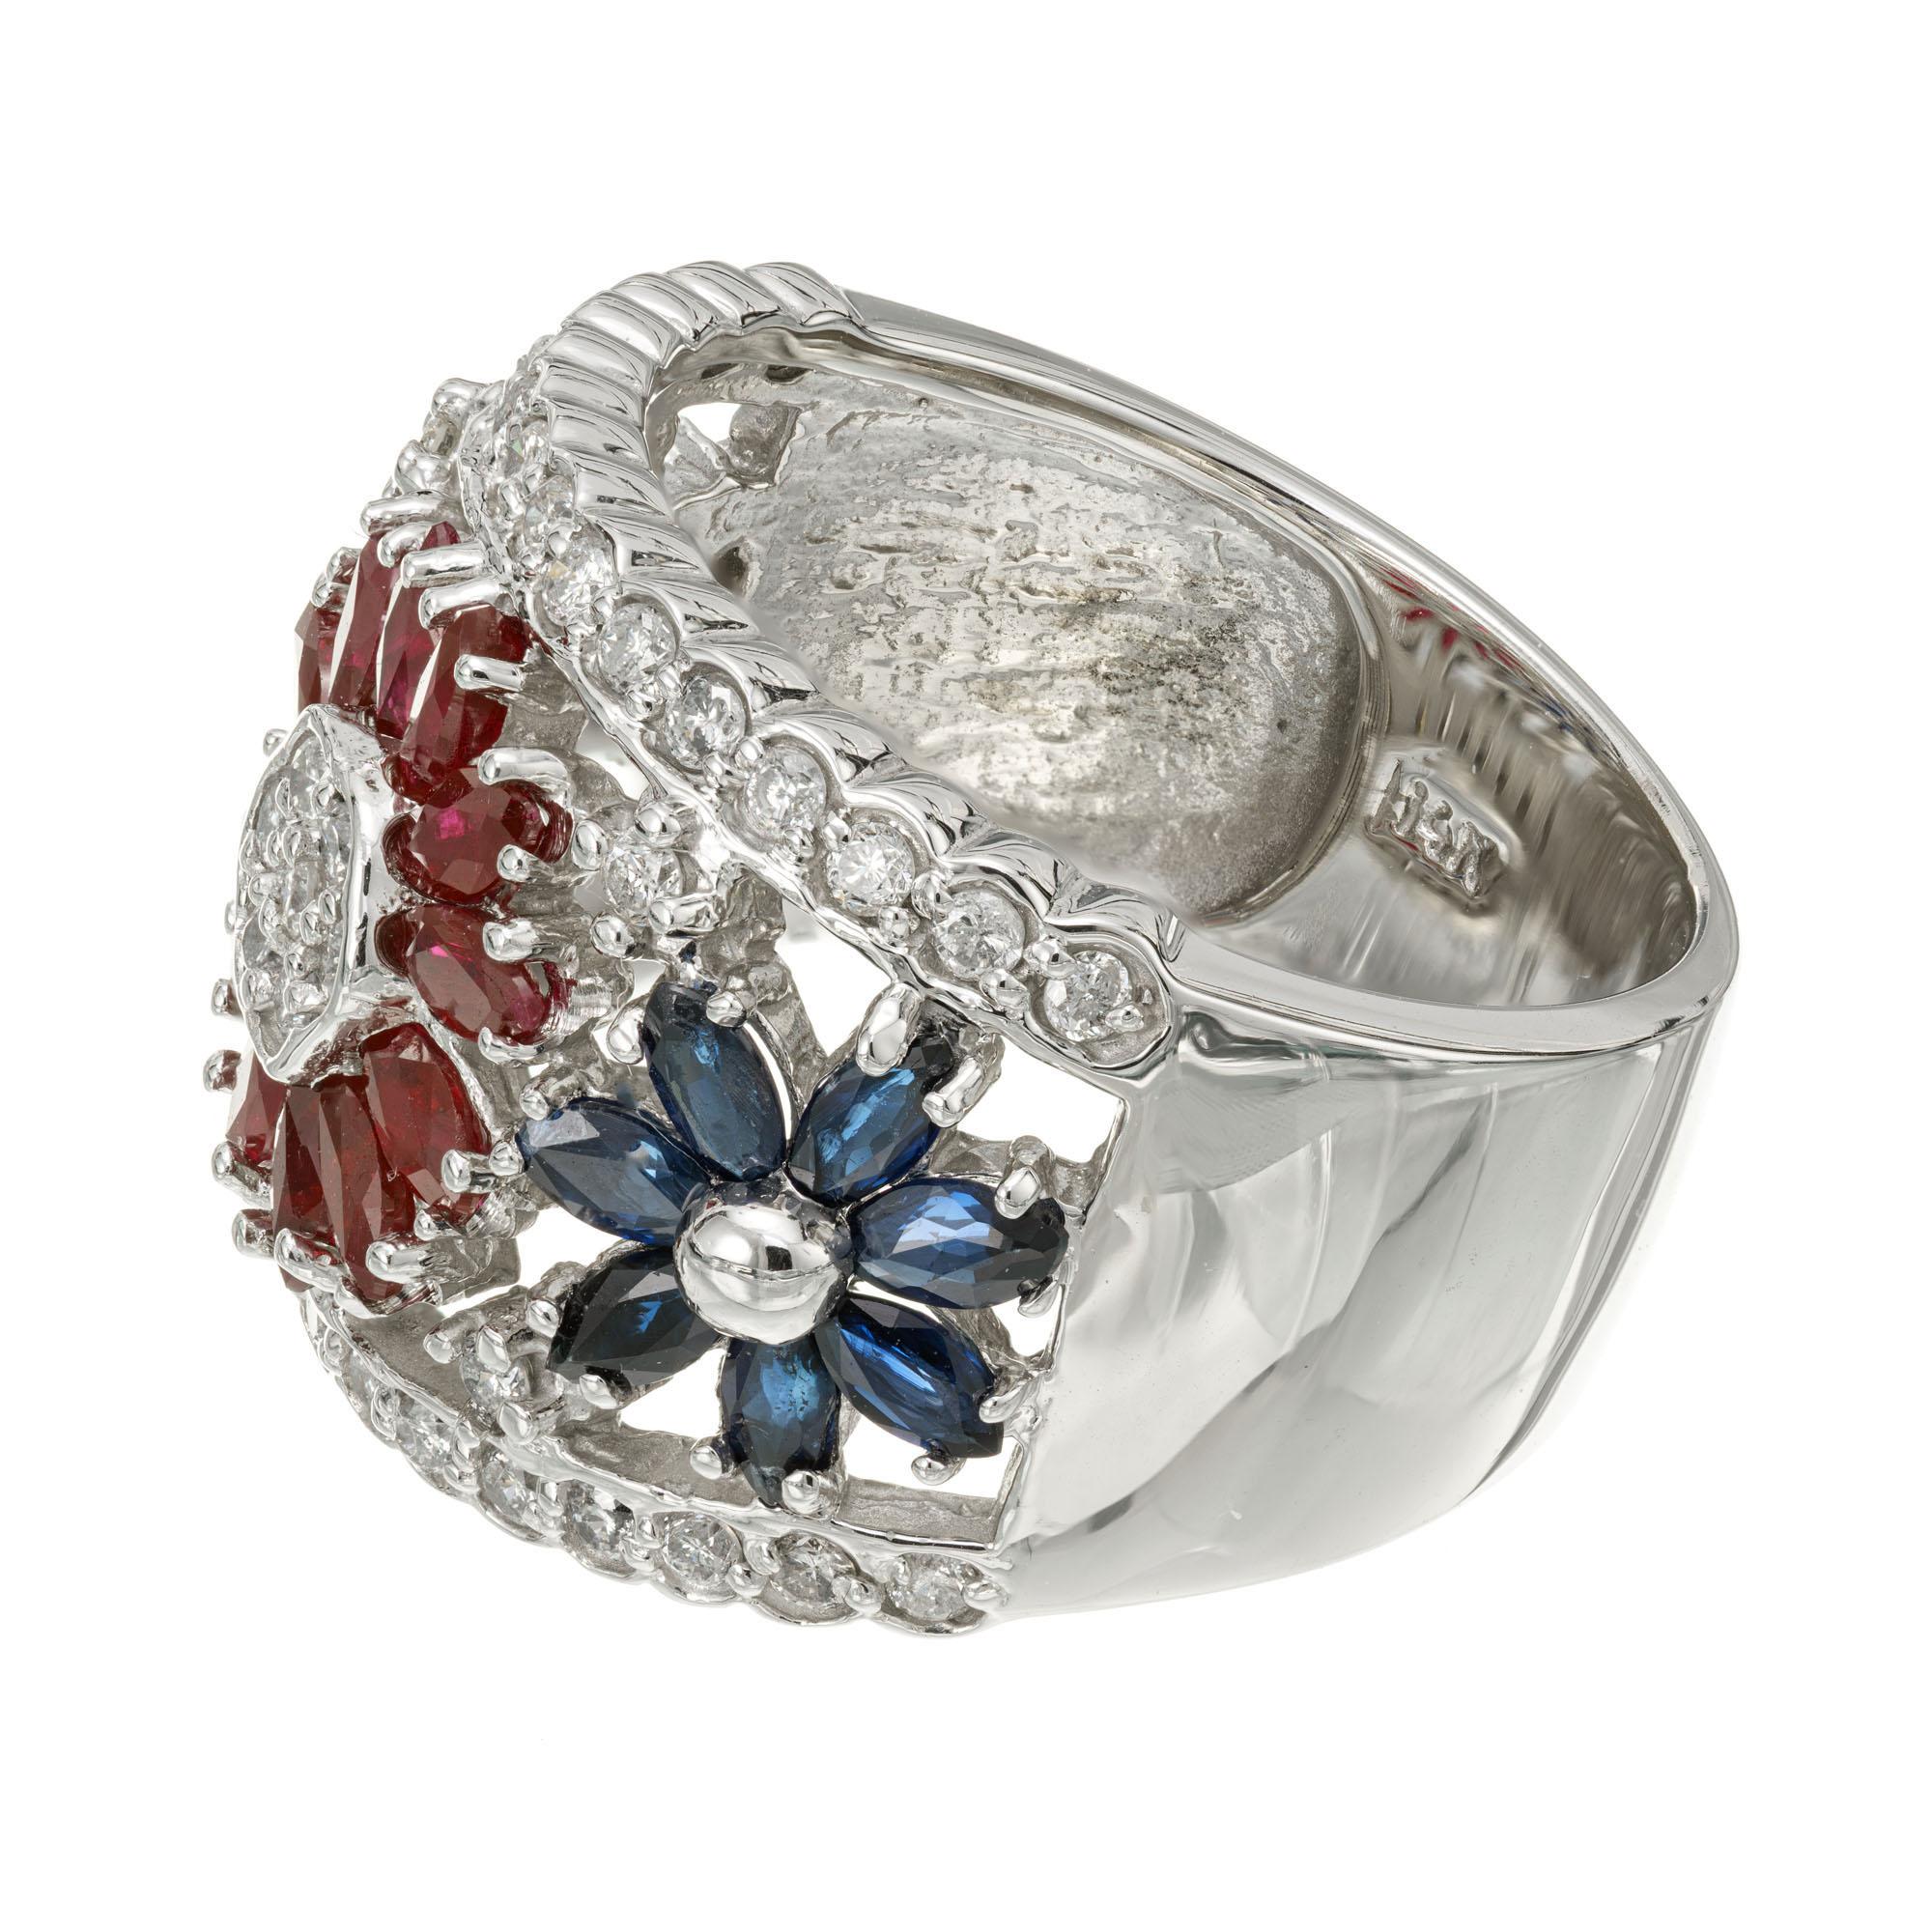 2.03 Carat Diamond Sapphire Ruby White Gold Flower Ring In Excellent Condition For Sale In Stamford, CT